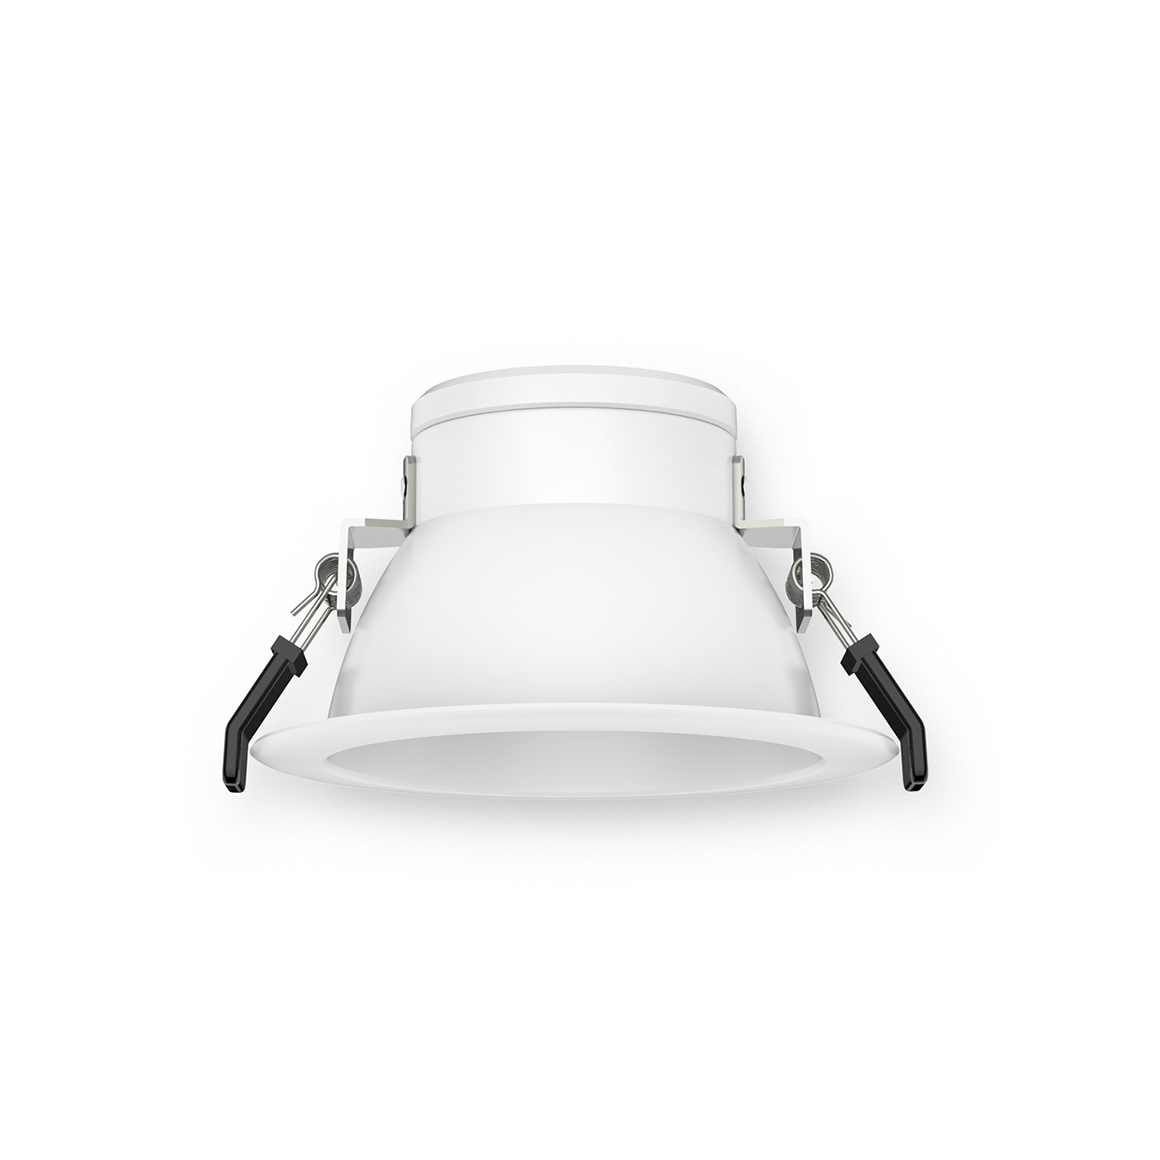 DownLight DS1 1450lm